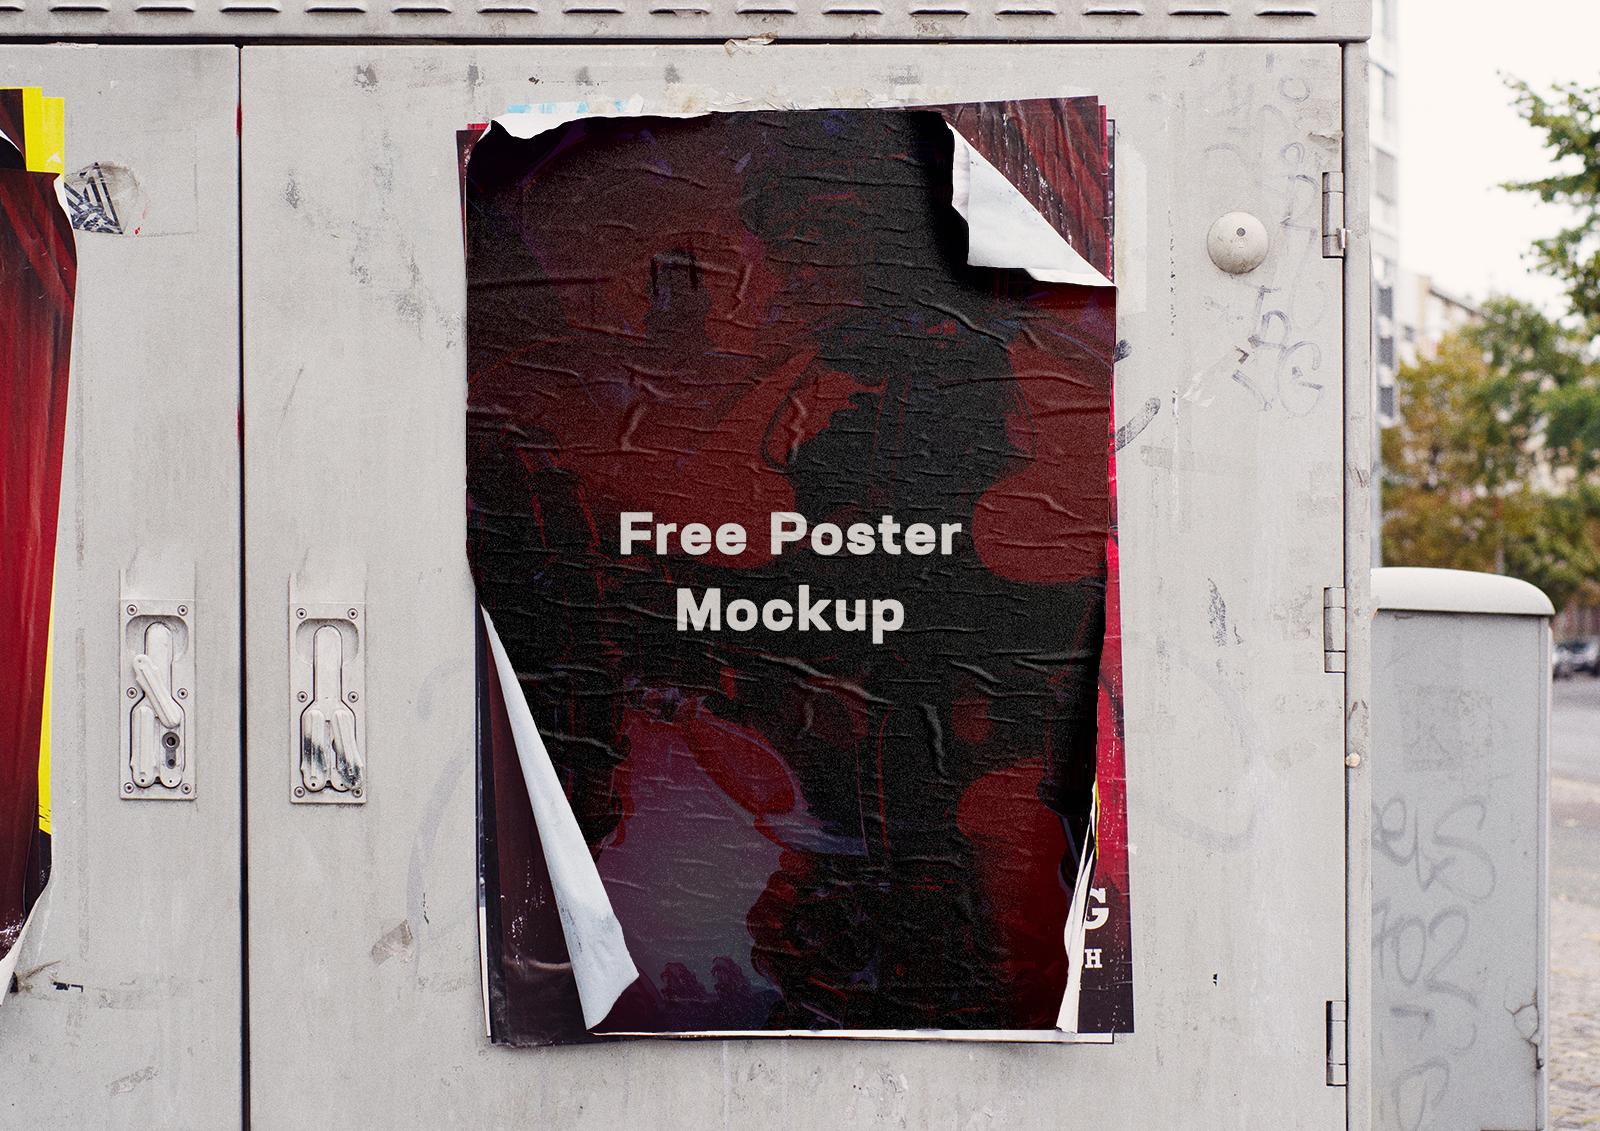 Download Free Weathered Street Poster Mockup | Free Mockups, Best Free PSD Mockups - ApeMockups